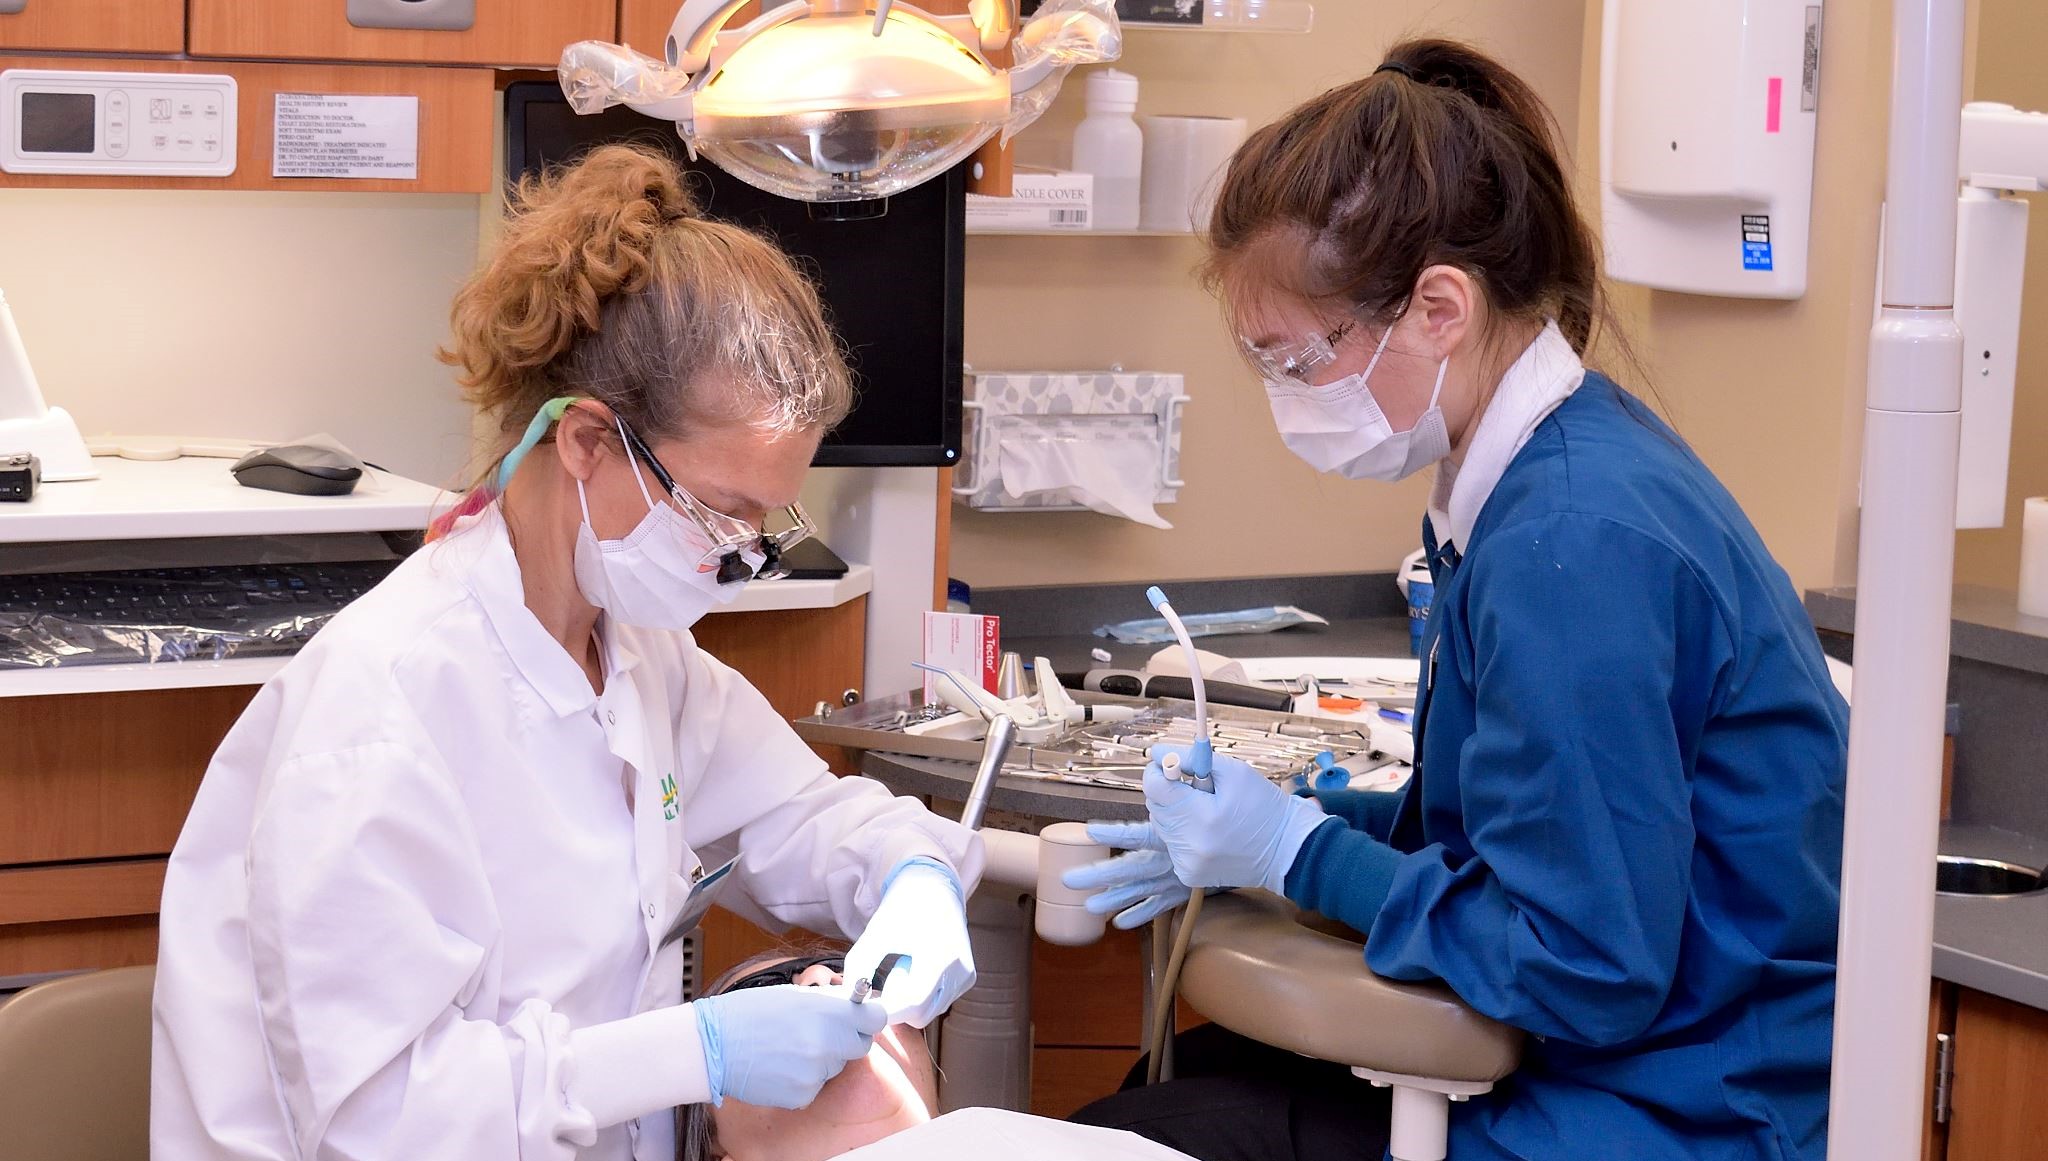 Dental student helping dentist with patient